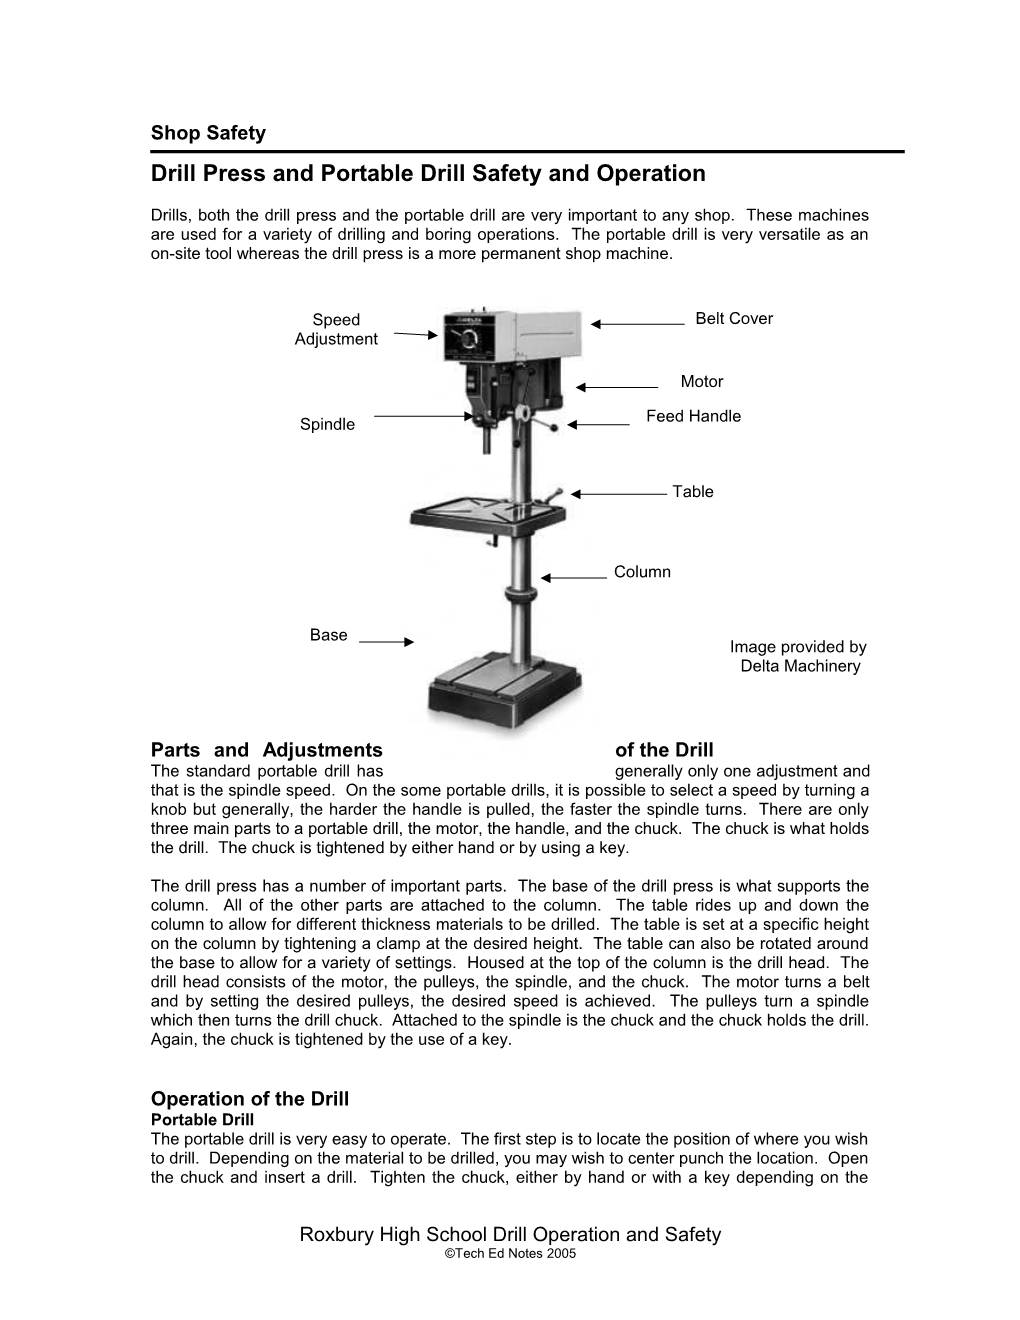 Drill Press and Portable Drill Safety and Operation